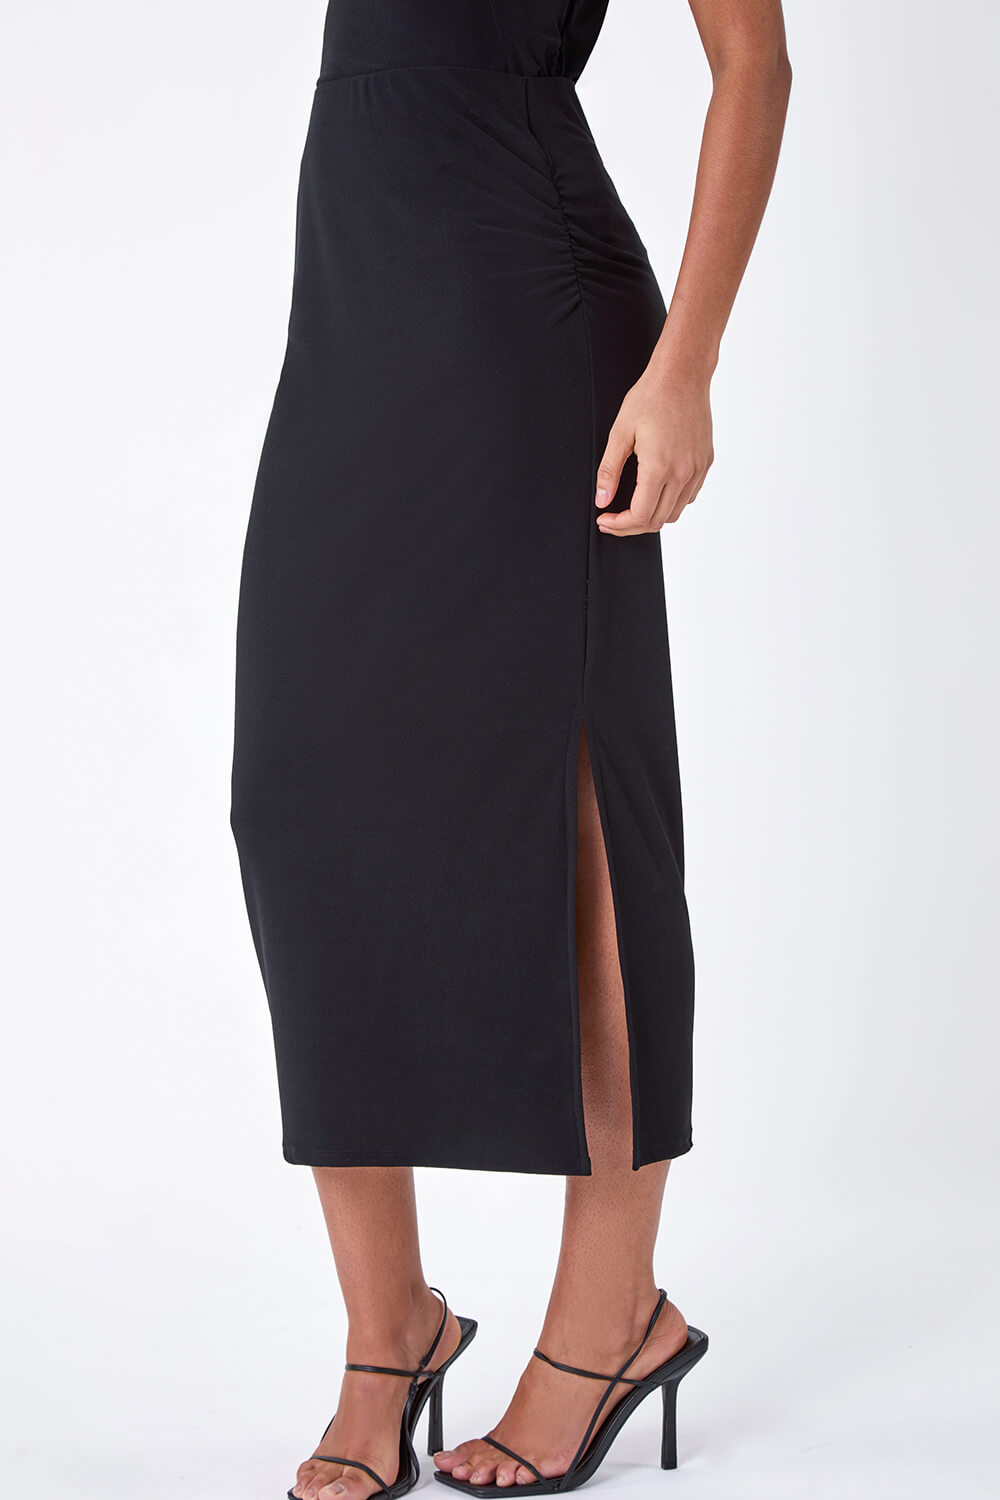 Black Side Ruched Stretch Midi Skirt, Image 4 of 5